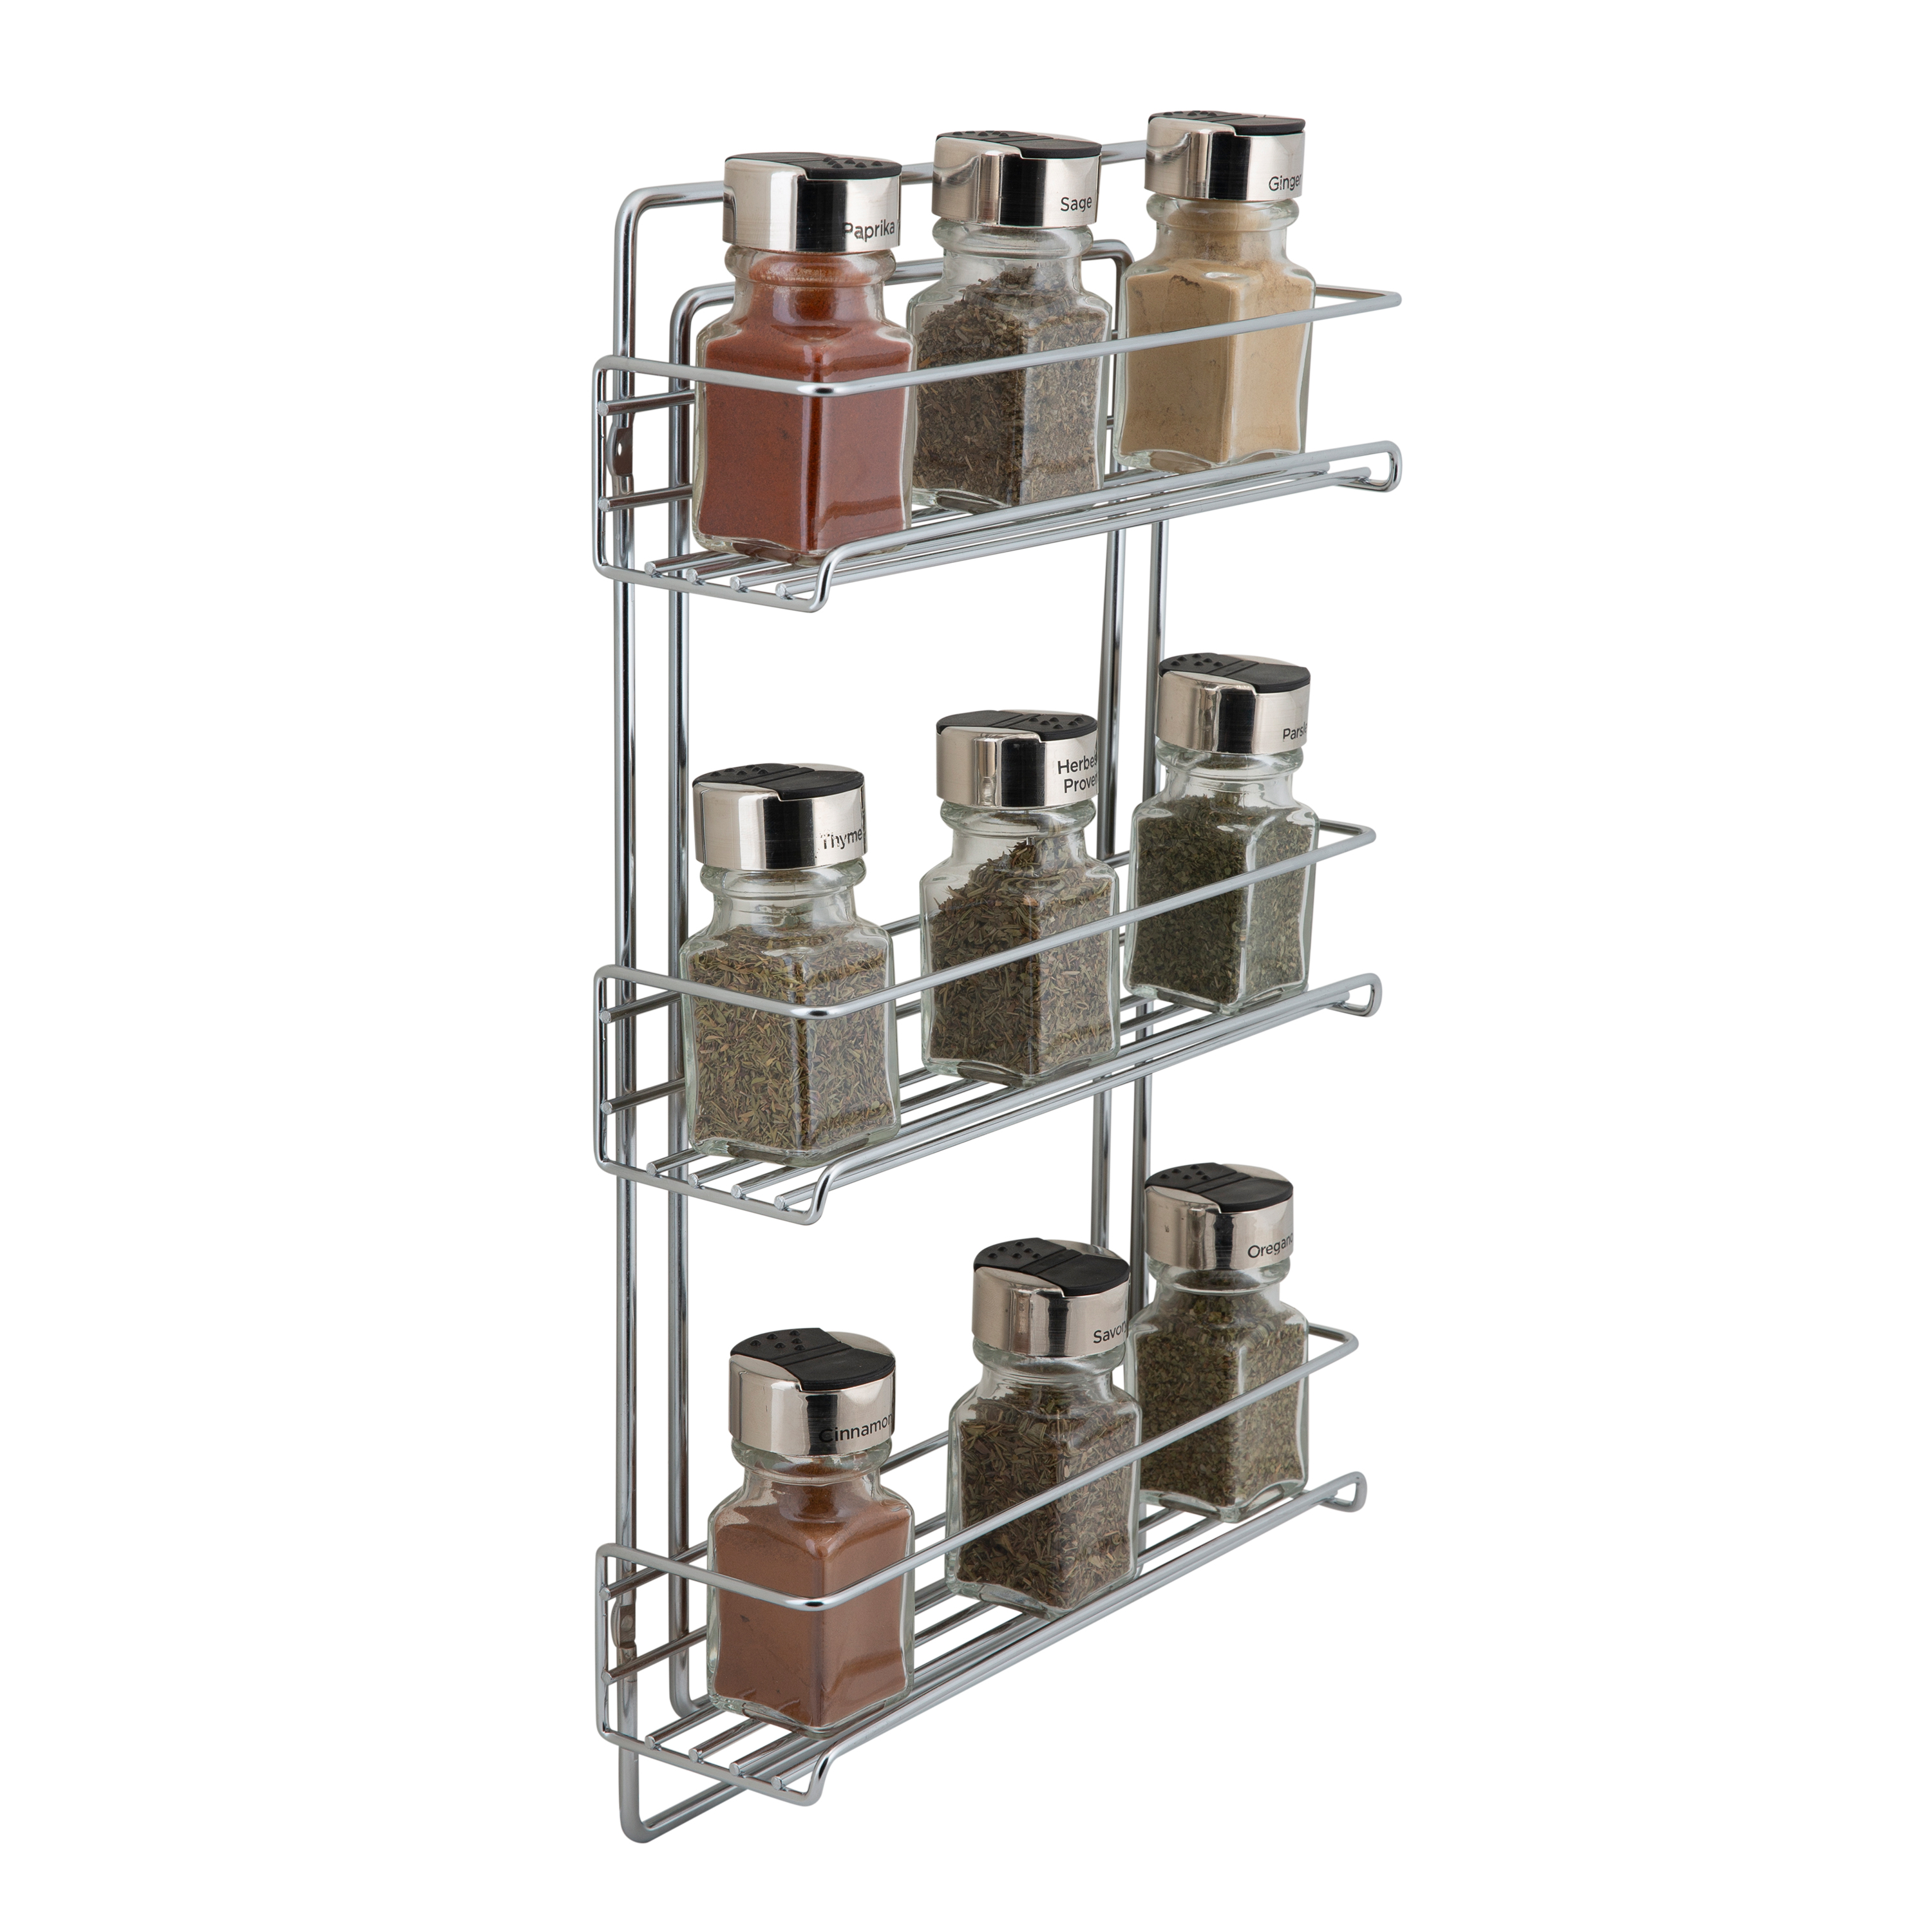 Organize It All 3 Tier Wall Mountable Spice Rack in Chrome - image 5 of 6